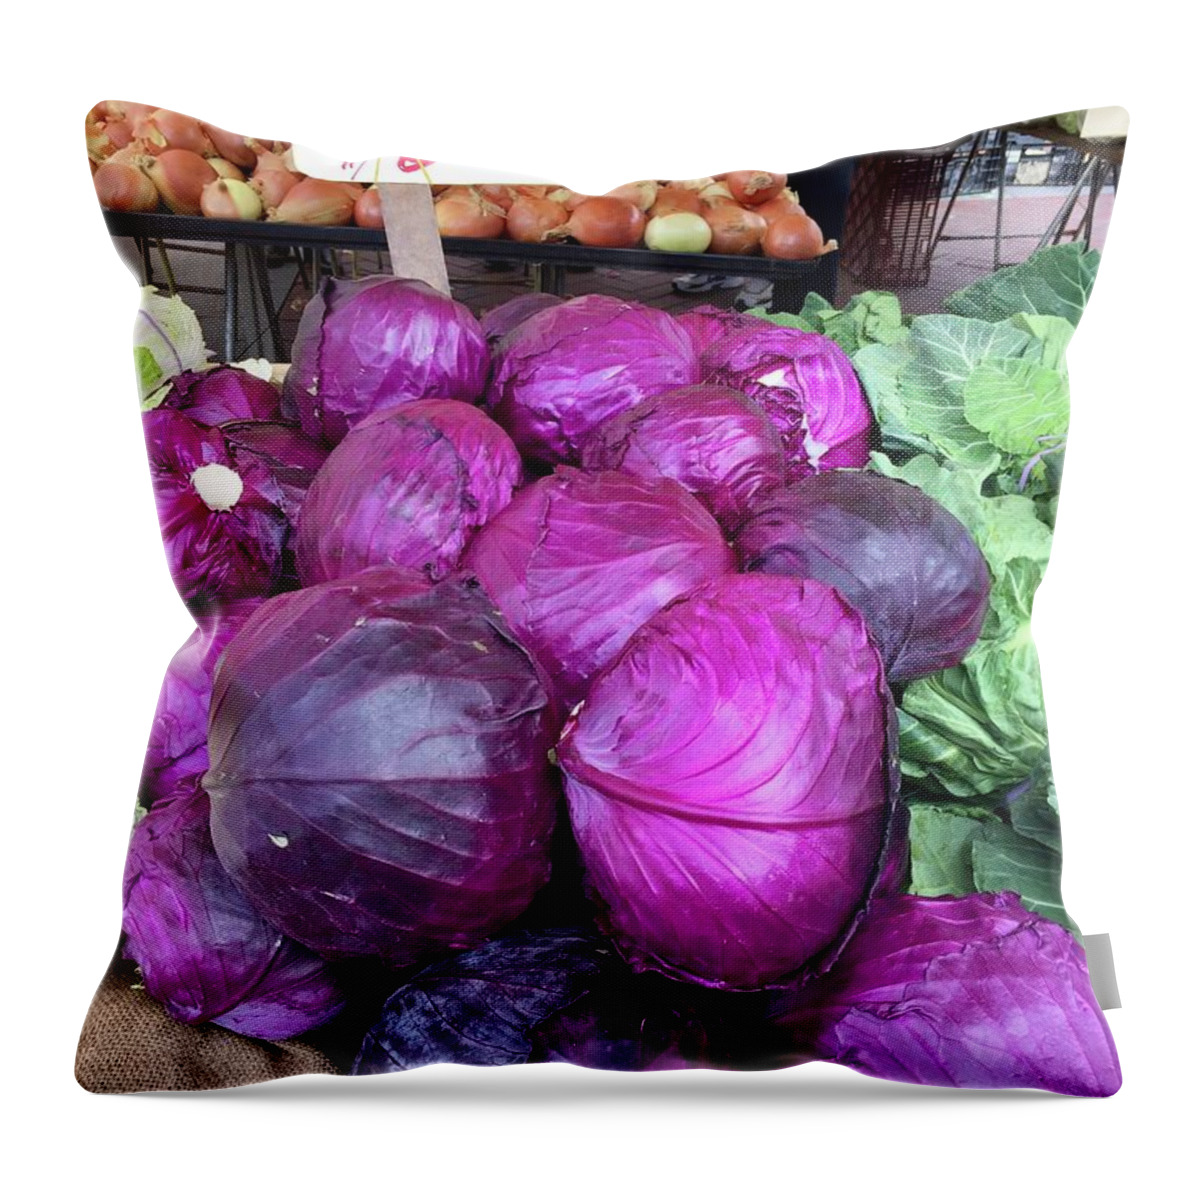 Civic Center Throw Pillow featuring the photograph Civic Center Farmers Market 1-2 by J Doyne Miller